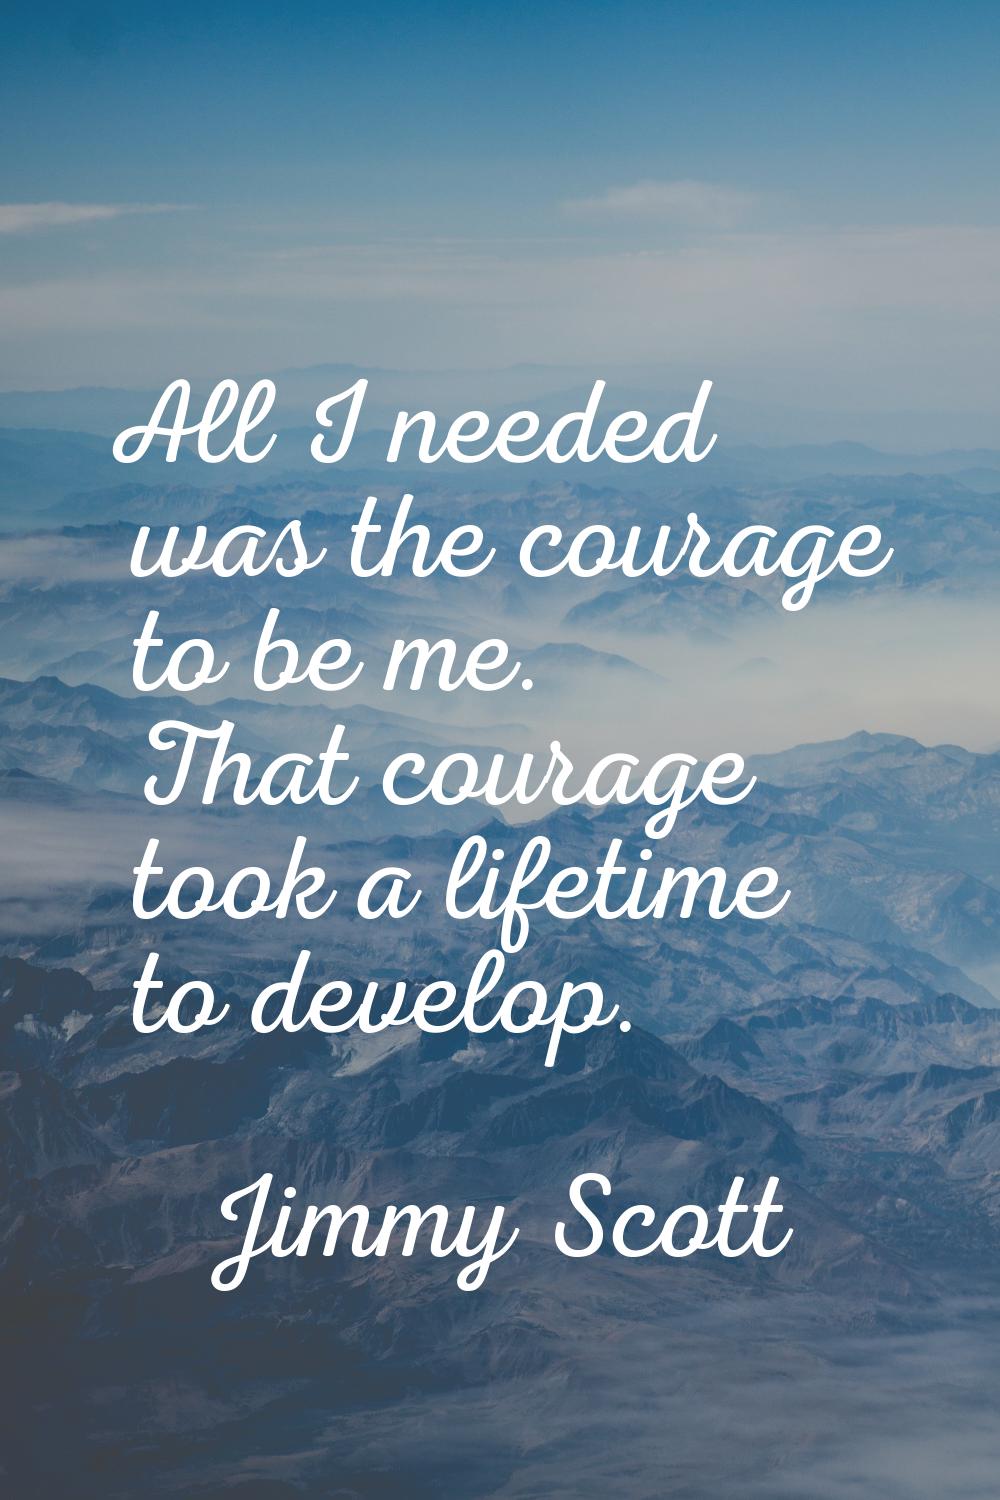 All I needed was the courage to be me. That courage took a lifetime to develop.